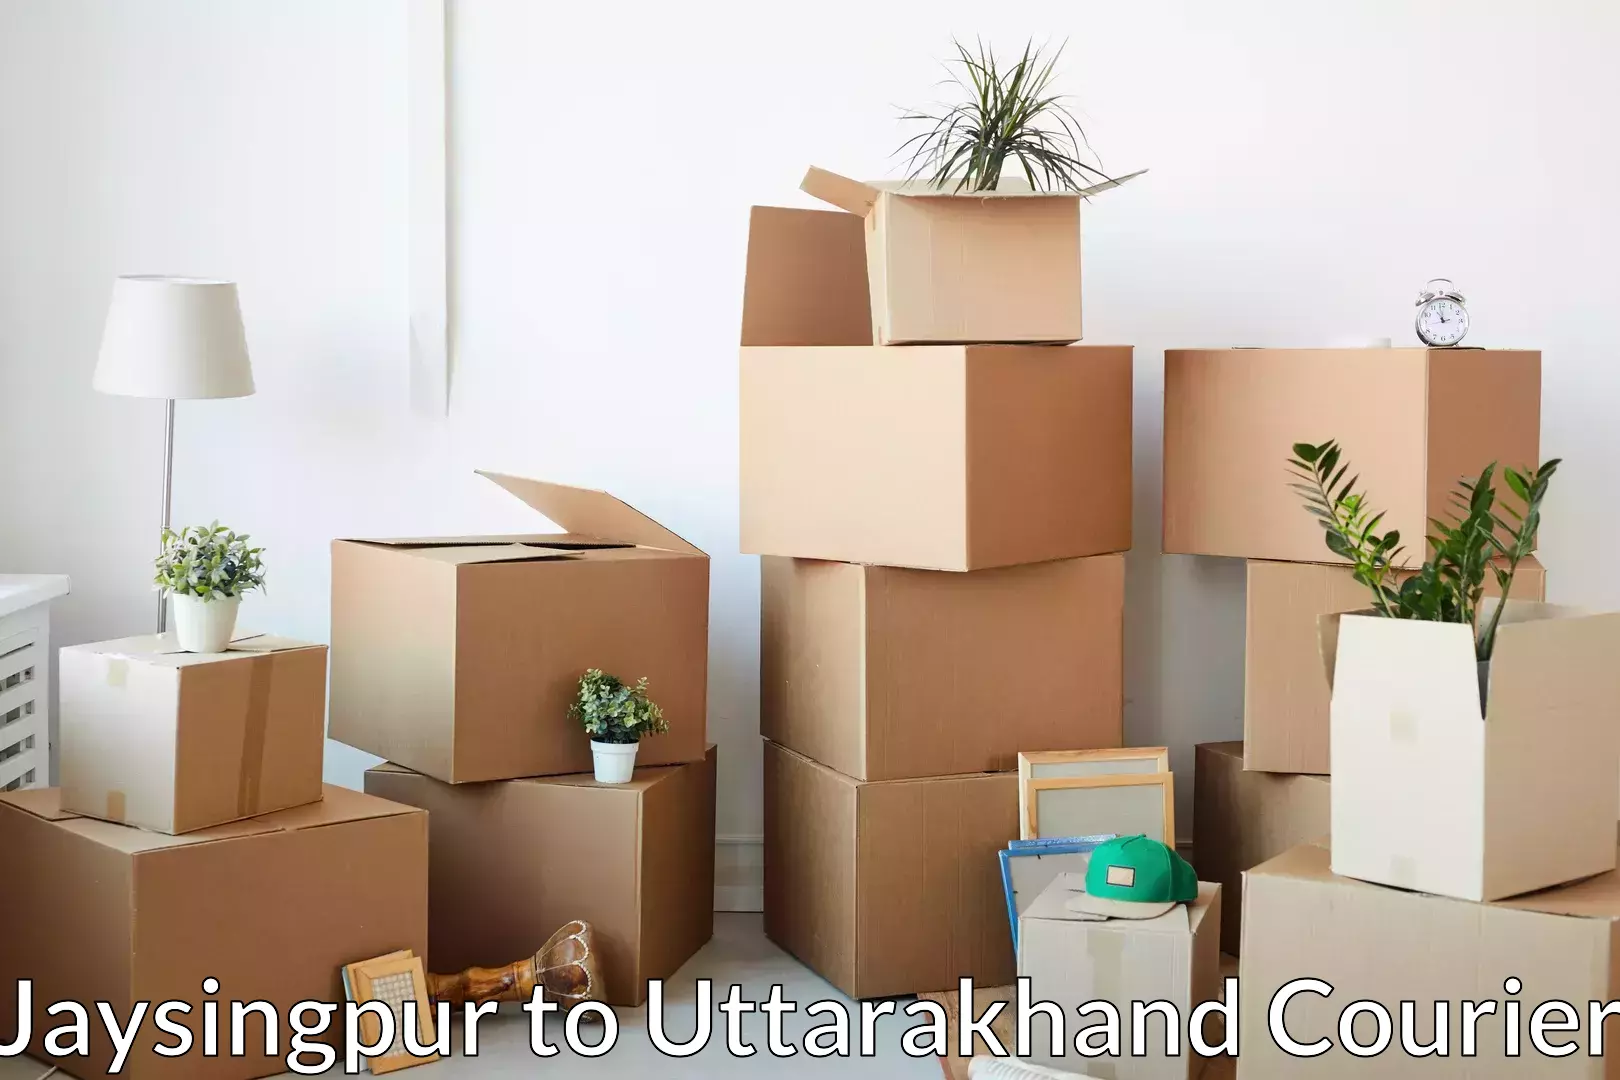 Personalized relocation plans Jaysingpur to Mussoorie